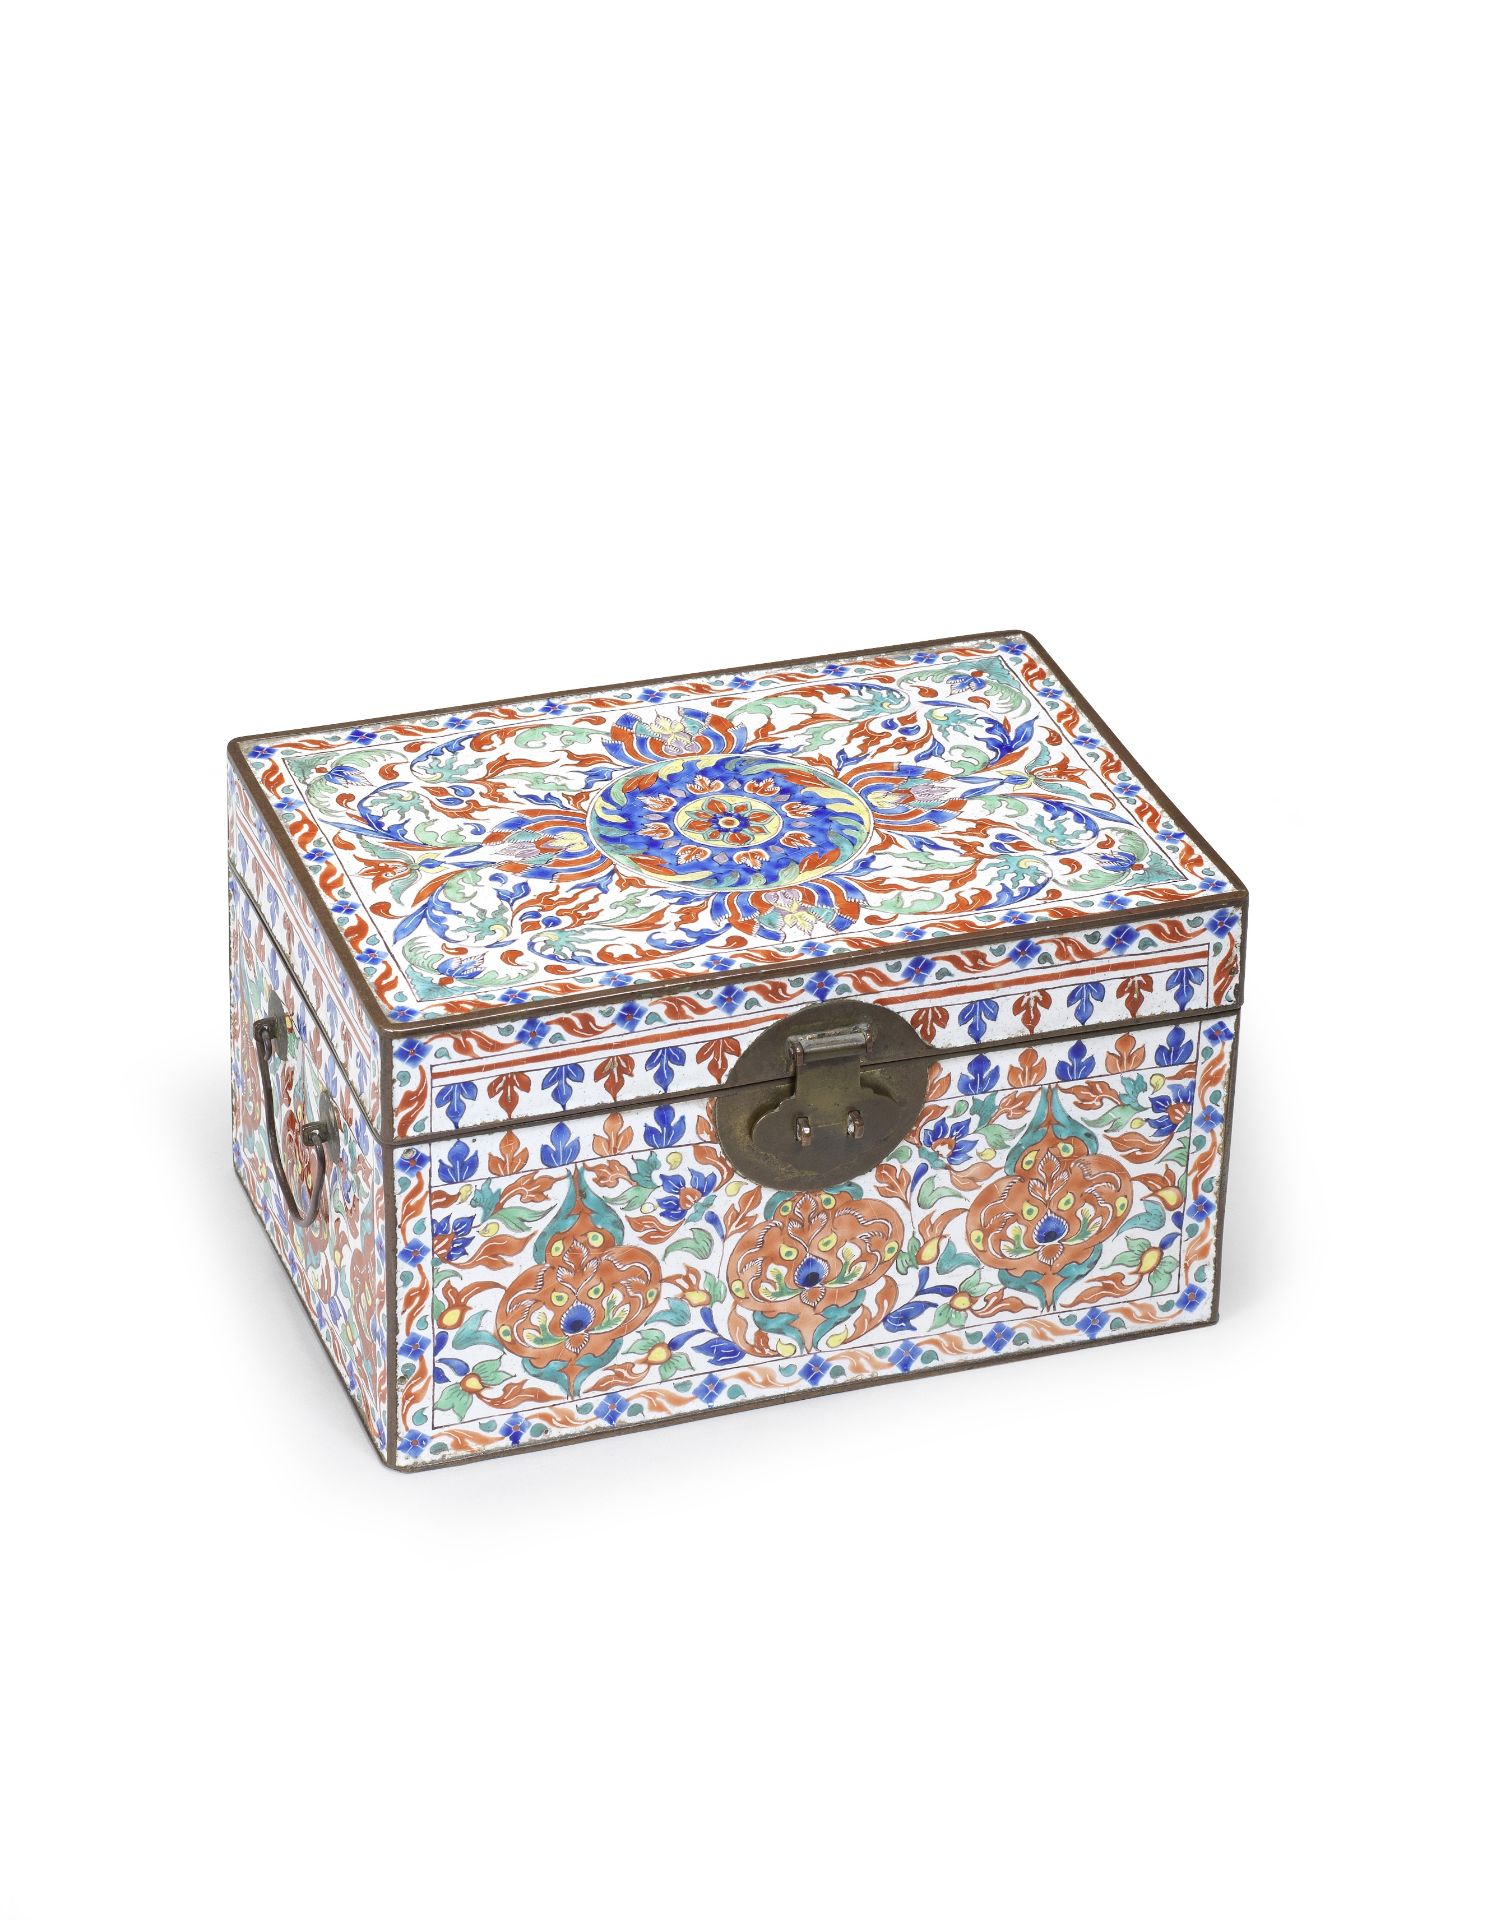 A RARE PAINTED ENAMEL RECTANGULAR CASKET FOR THE MIDDLE-EASTERN MARKET 18th century